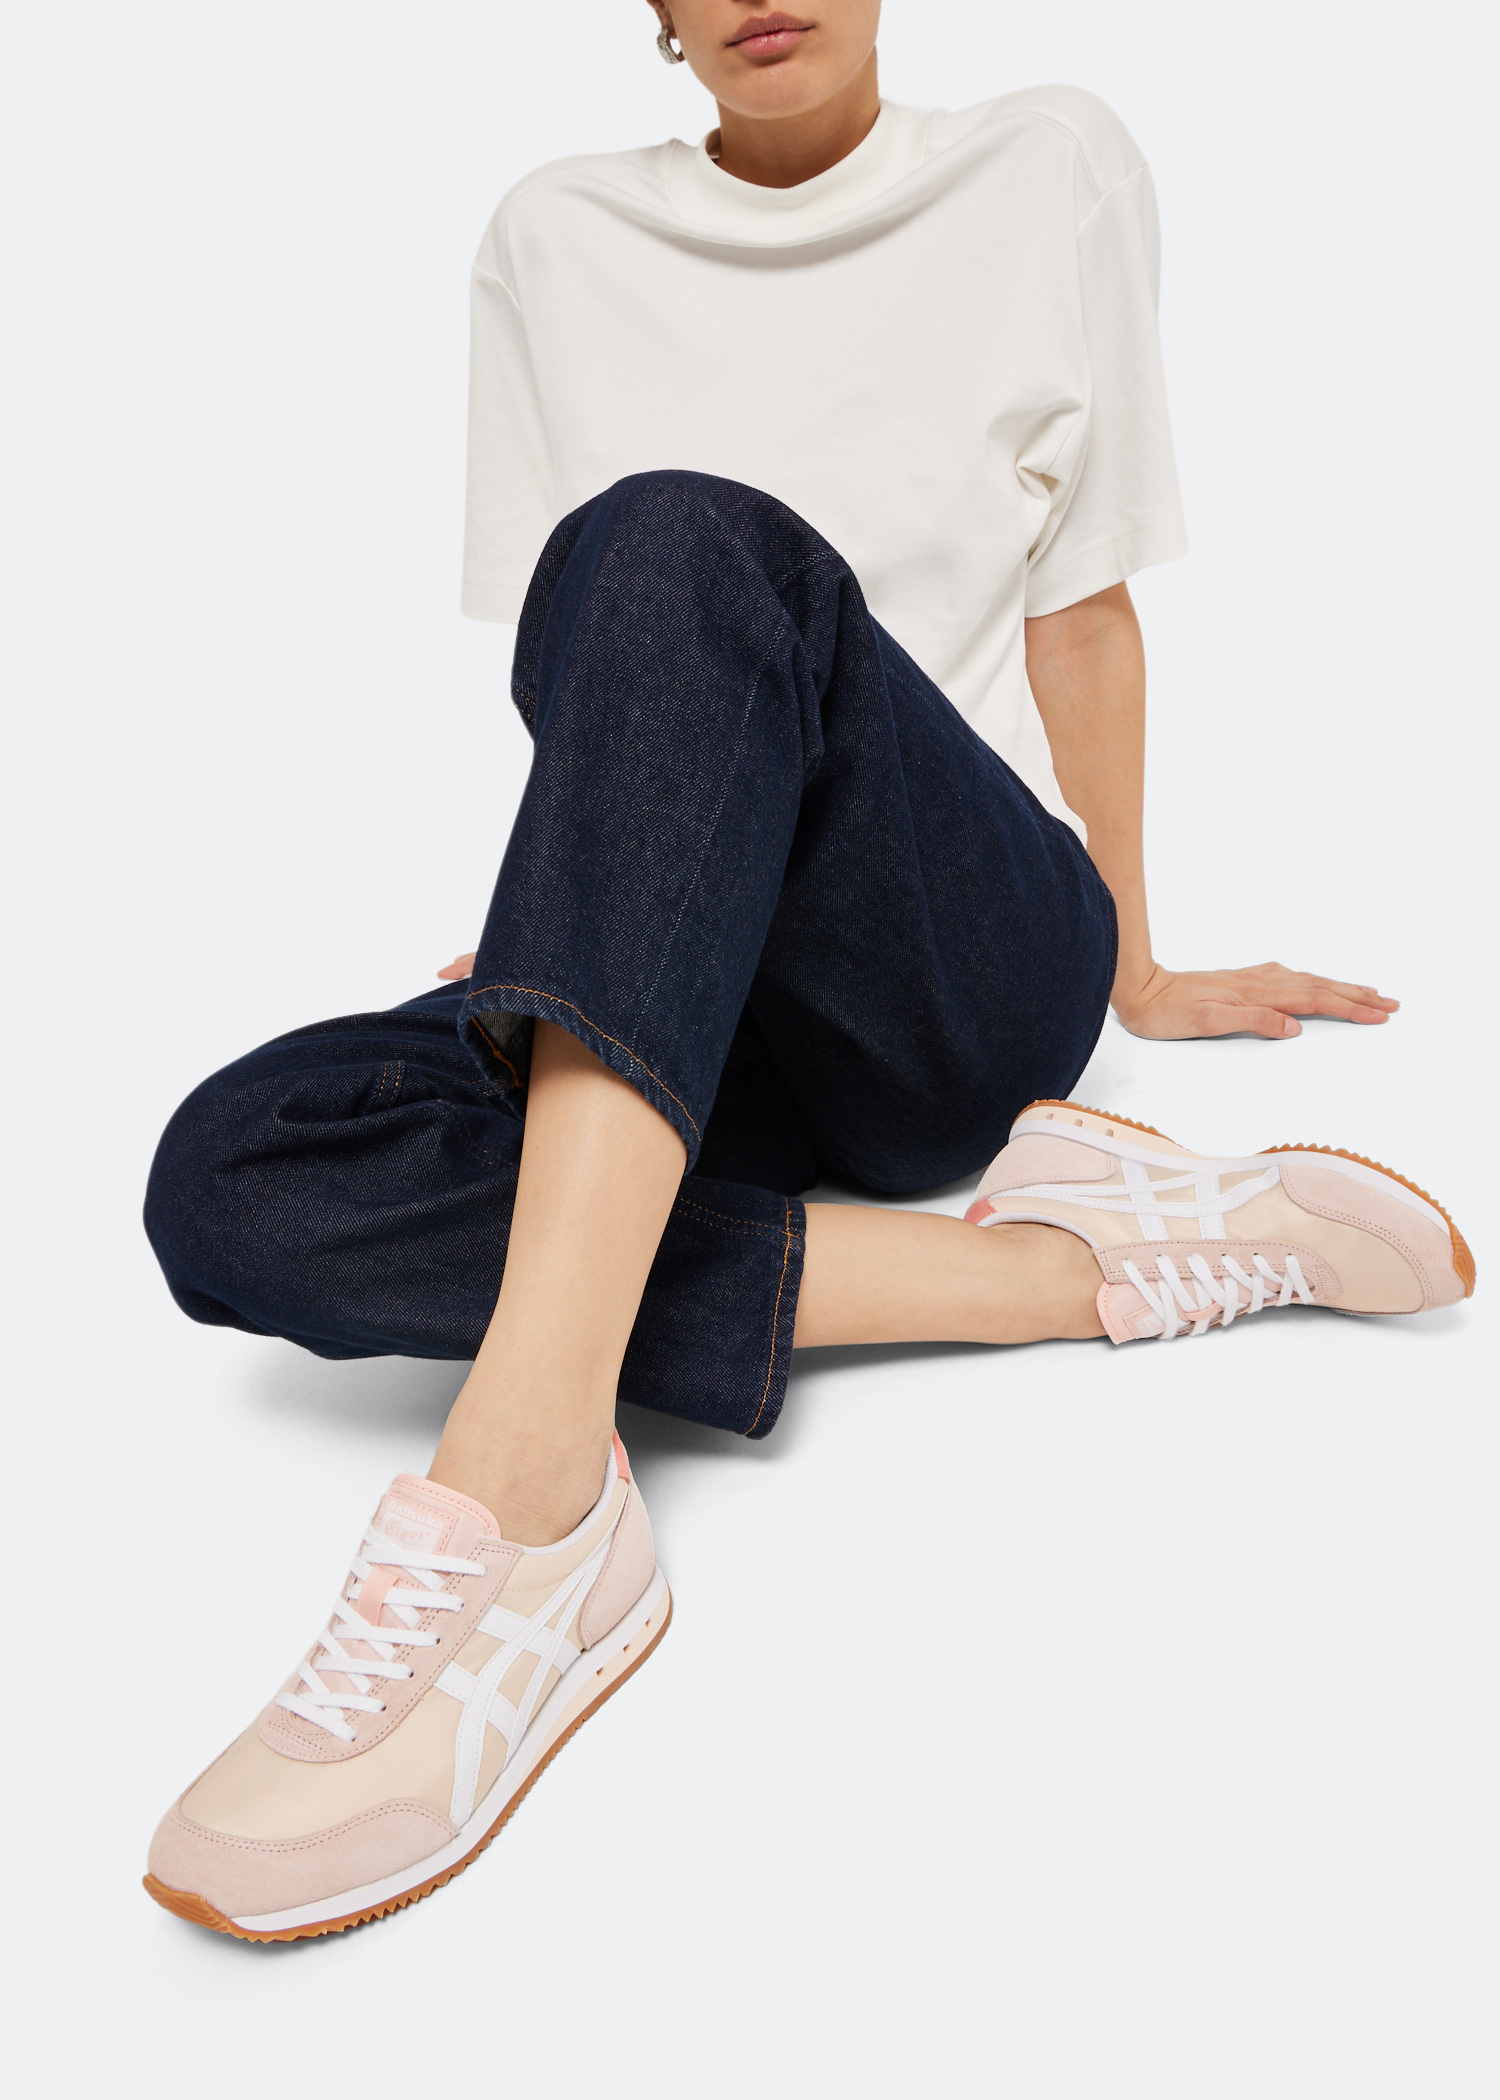 Onitsuka Tiger New York sneakers for Women - Pink in KSA | Level Shoes